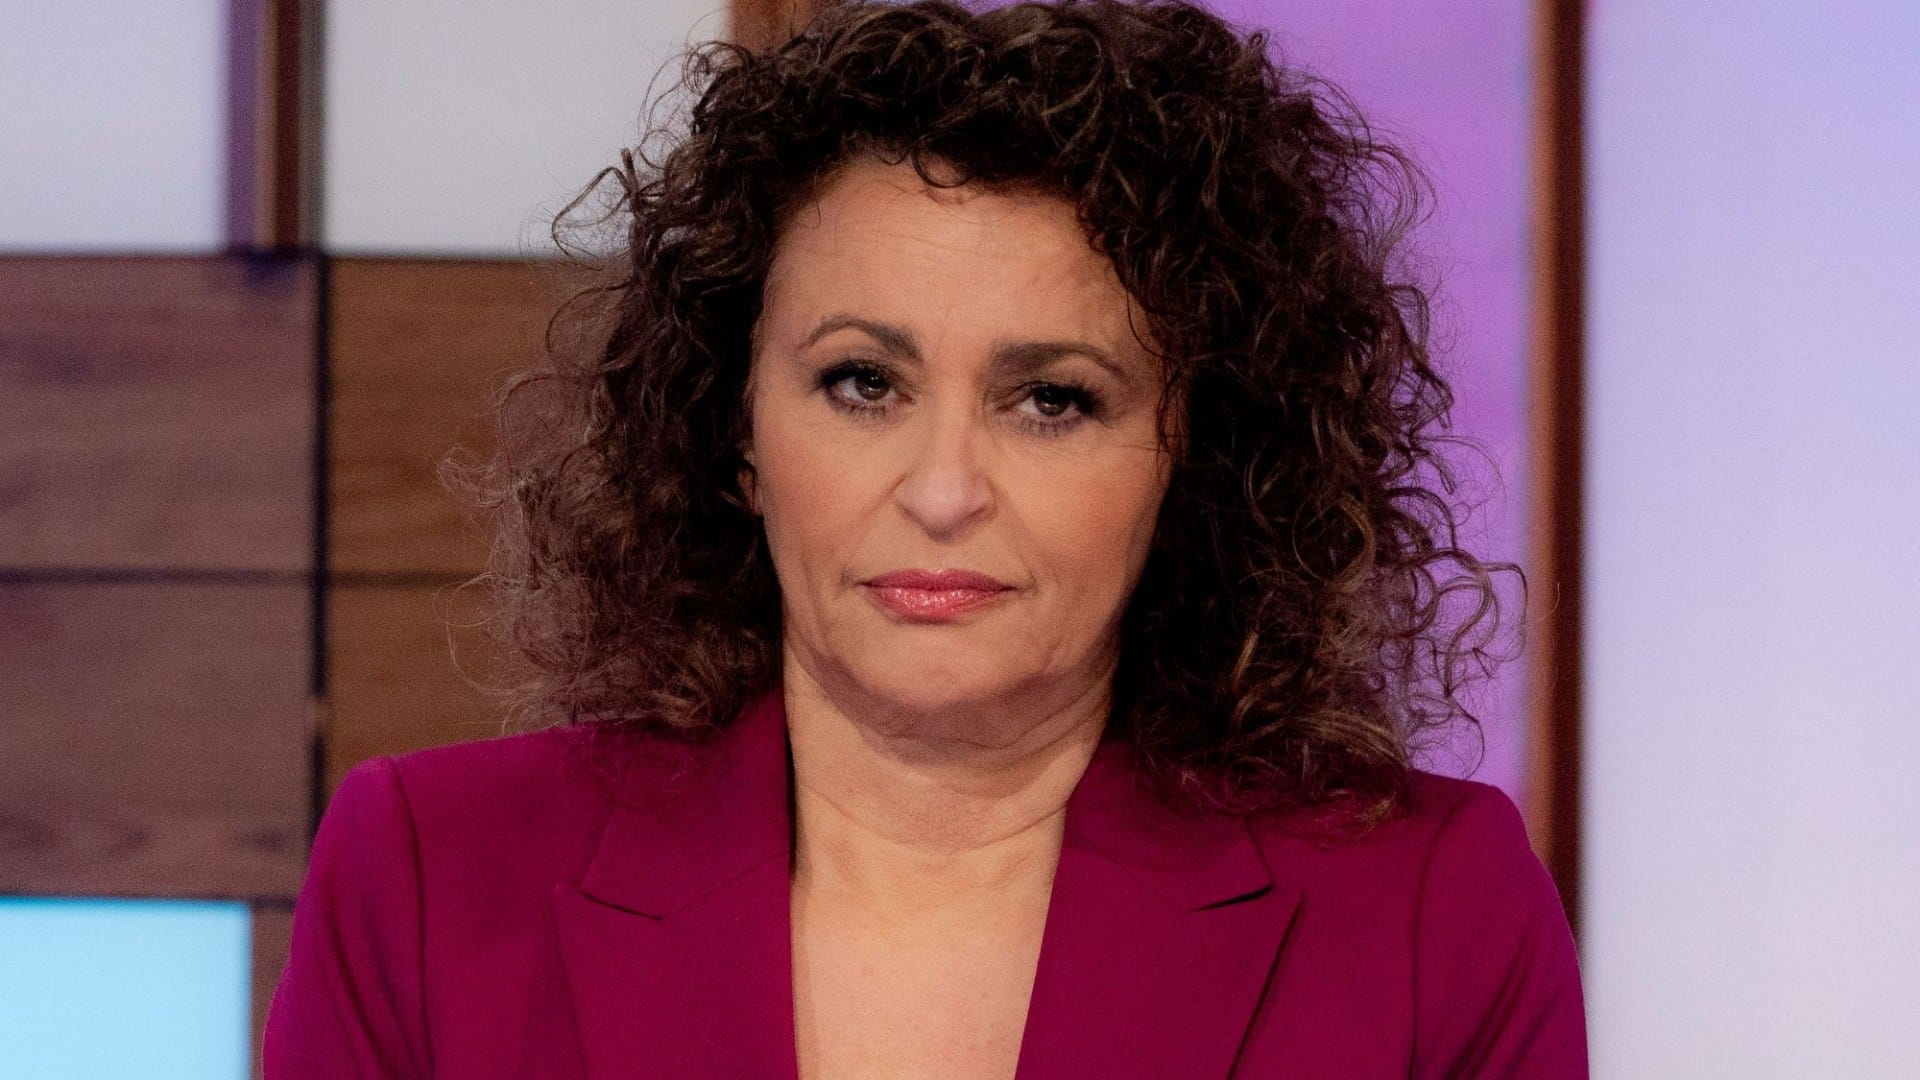 Loose Women’s Nadia Sawalha rushed to hospital after spotting worrying issue moments before going on air